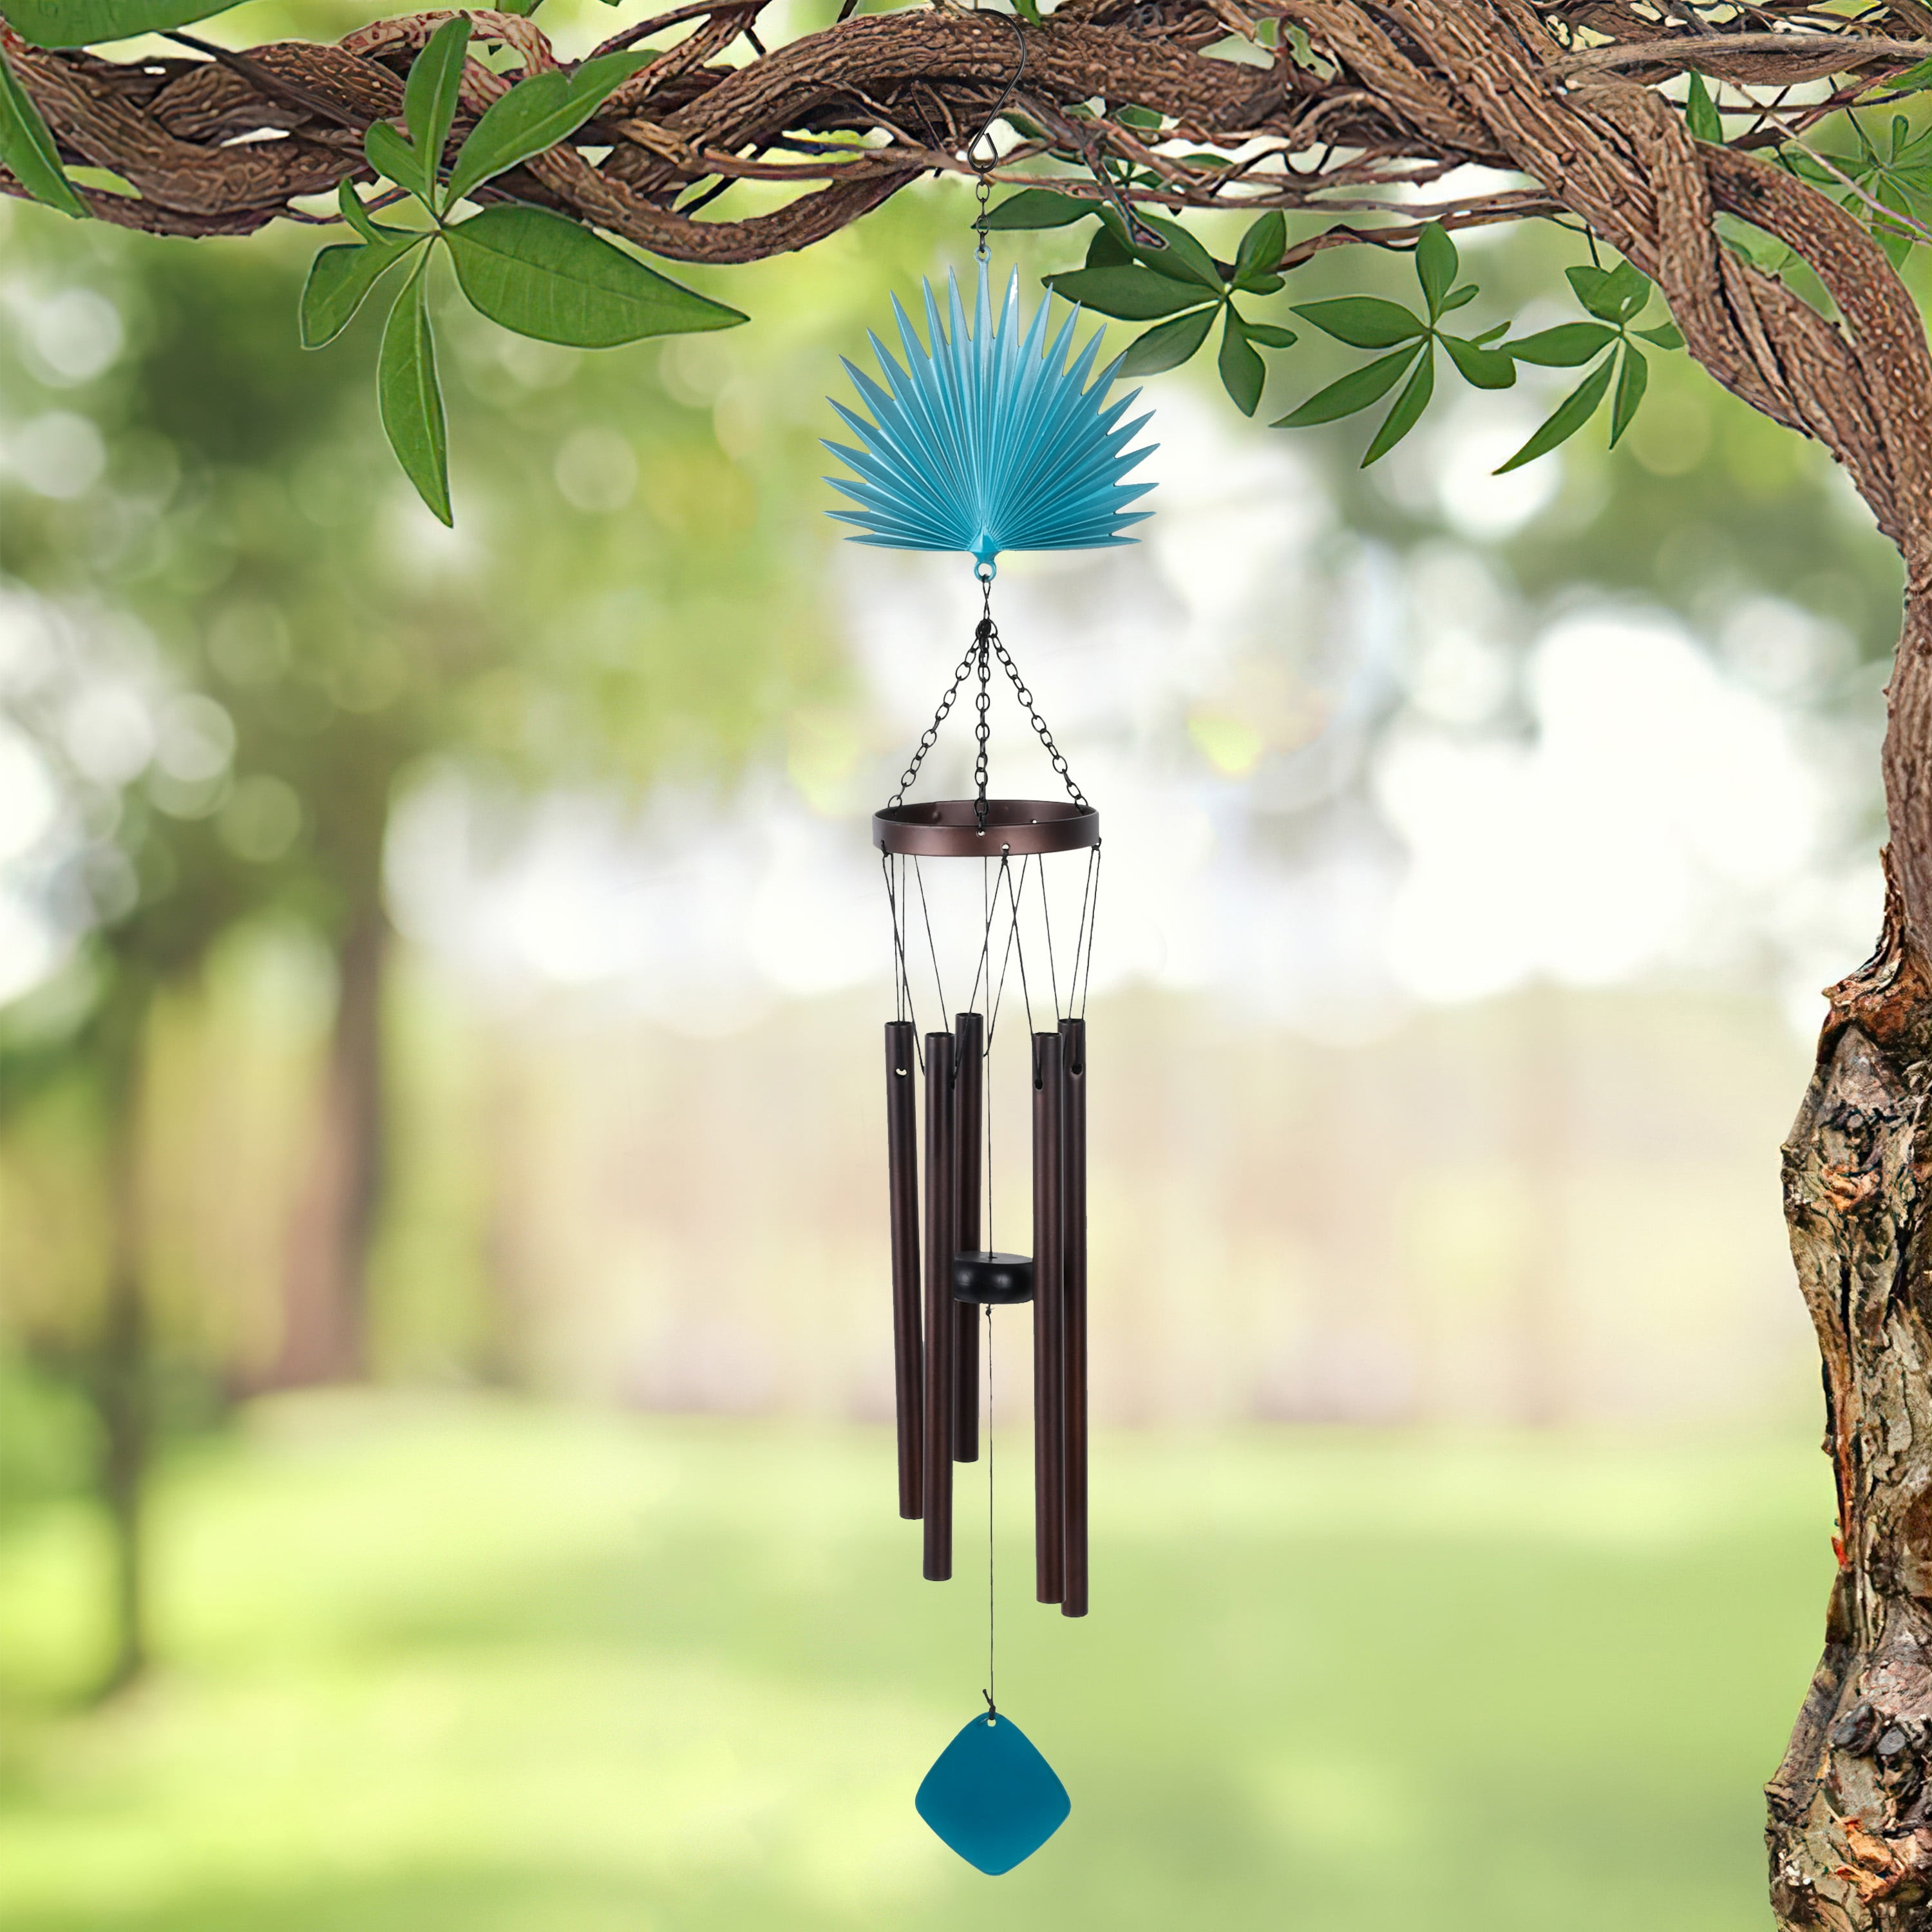 Melody Wind Bell Windchimes for Relaxation, Antique Bird Metal Wind Chime 